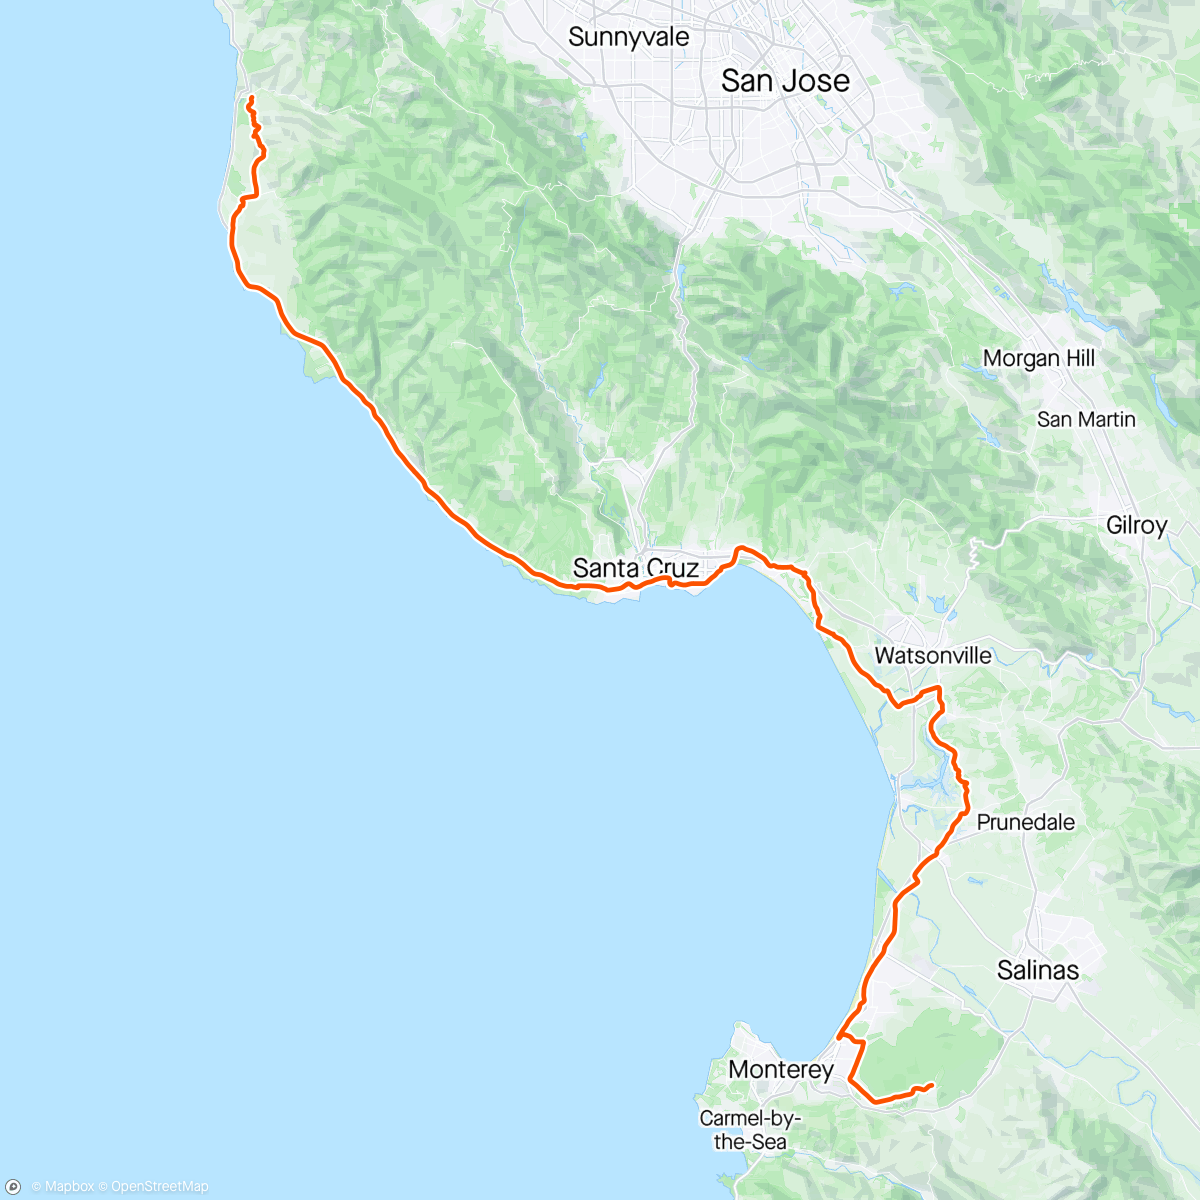 Mapa de la actividad, channeling my 17 y/o self and flooded with memories of this coastline from that chapter. vans, flat pedals and the $4 dump frame northbound headwind retribution sea otter tour commute stage 2. :)